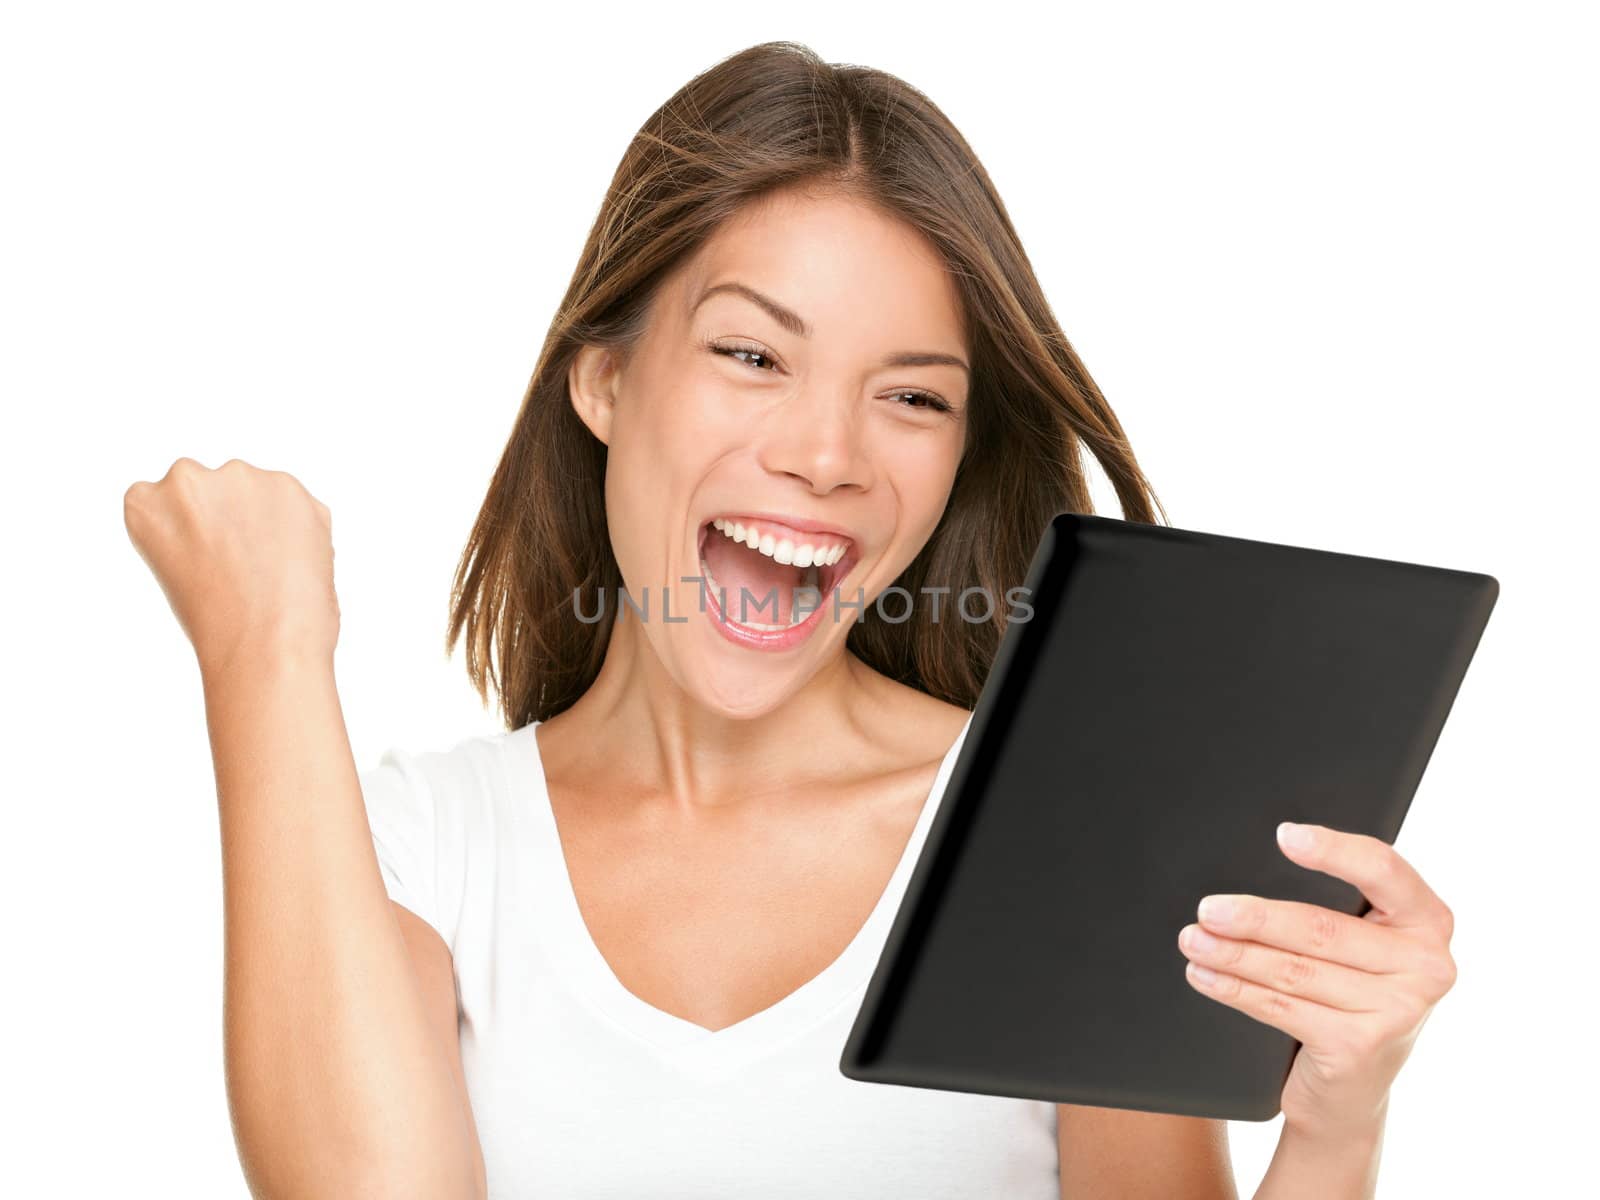 Tablet computer woman winning happy excited by Ariwasabi